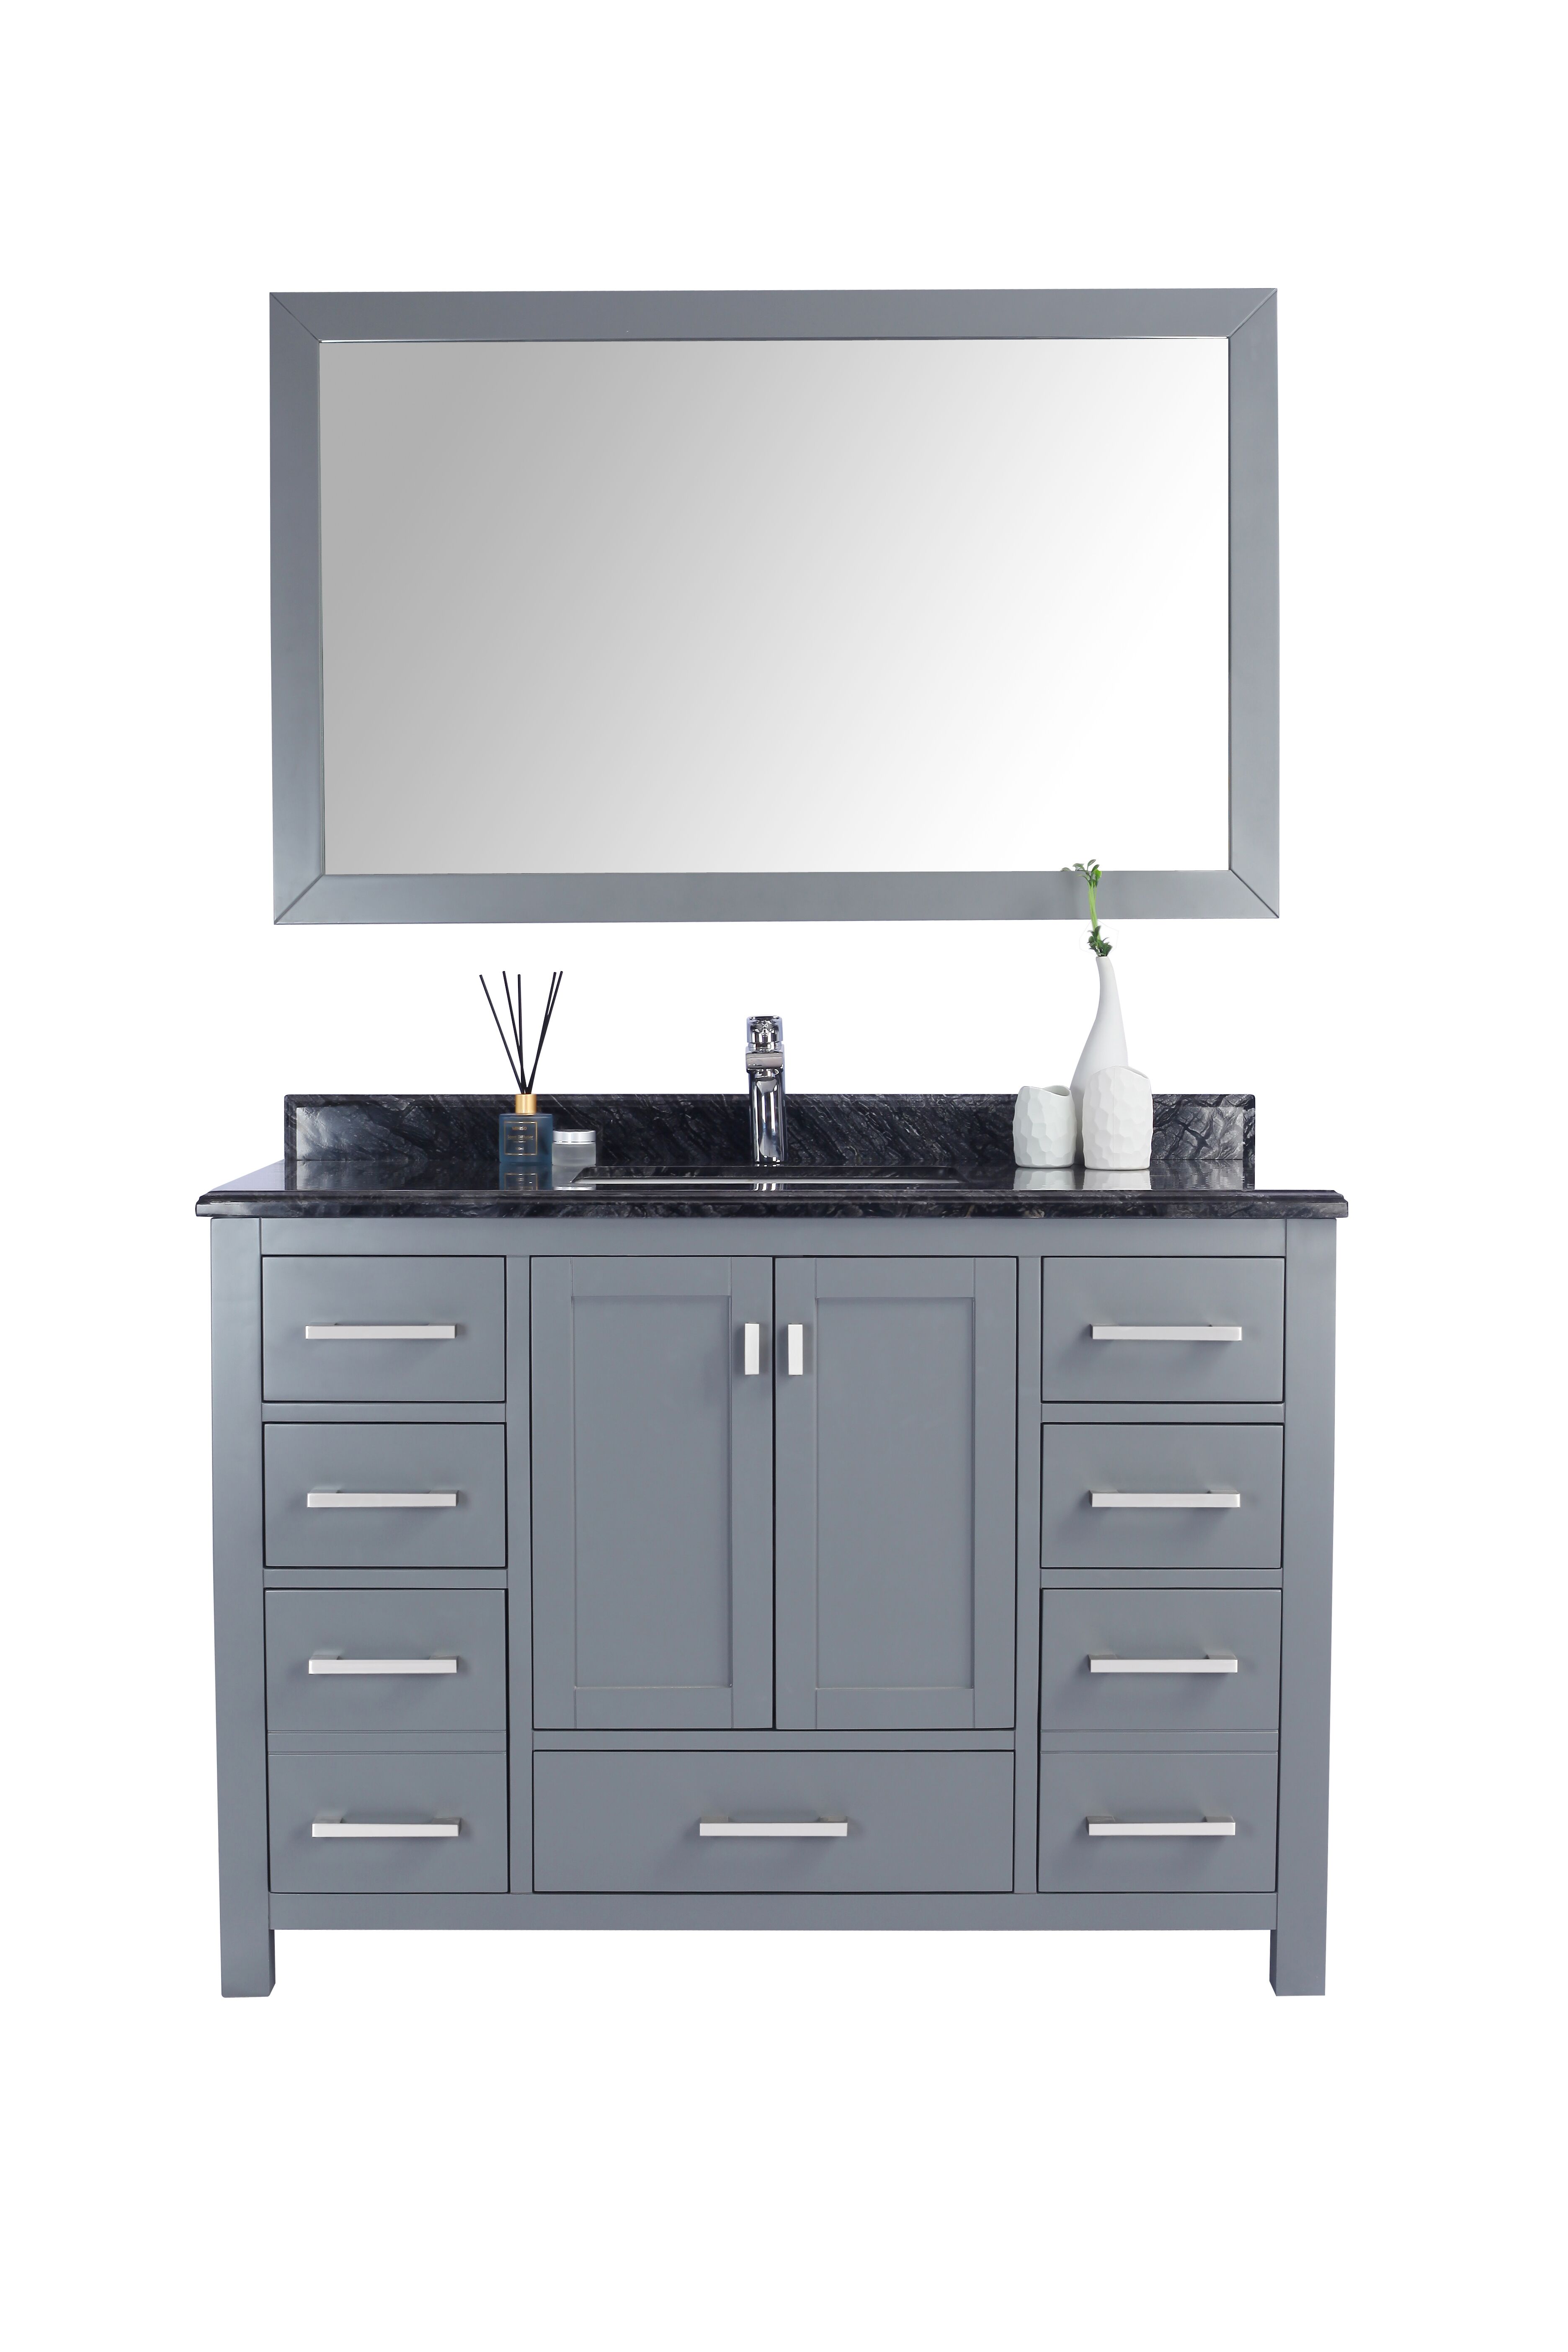 48" Single Sink Bathroom Vanity Cabinet + Top and Color Options